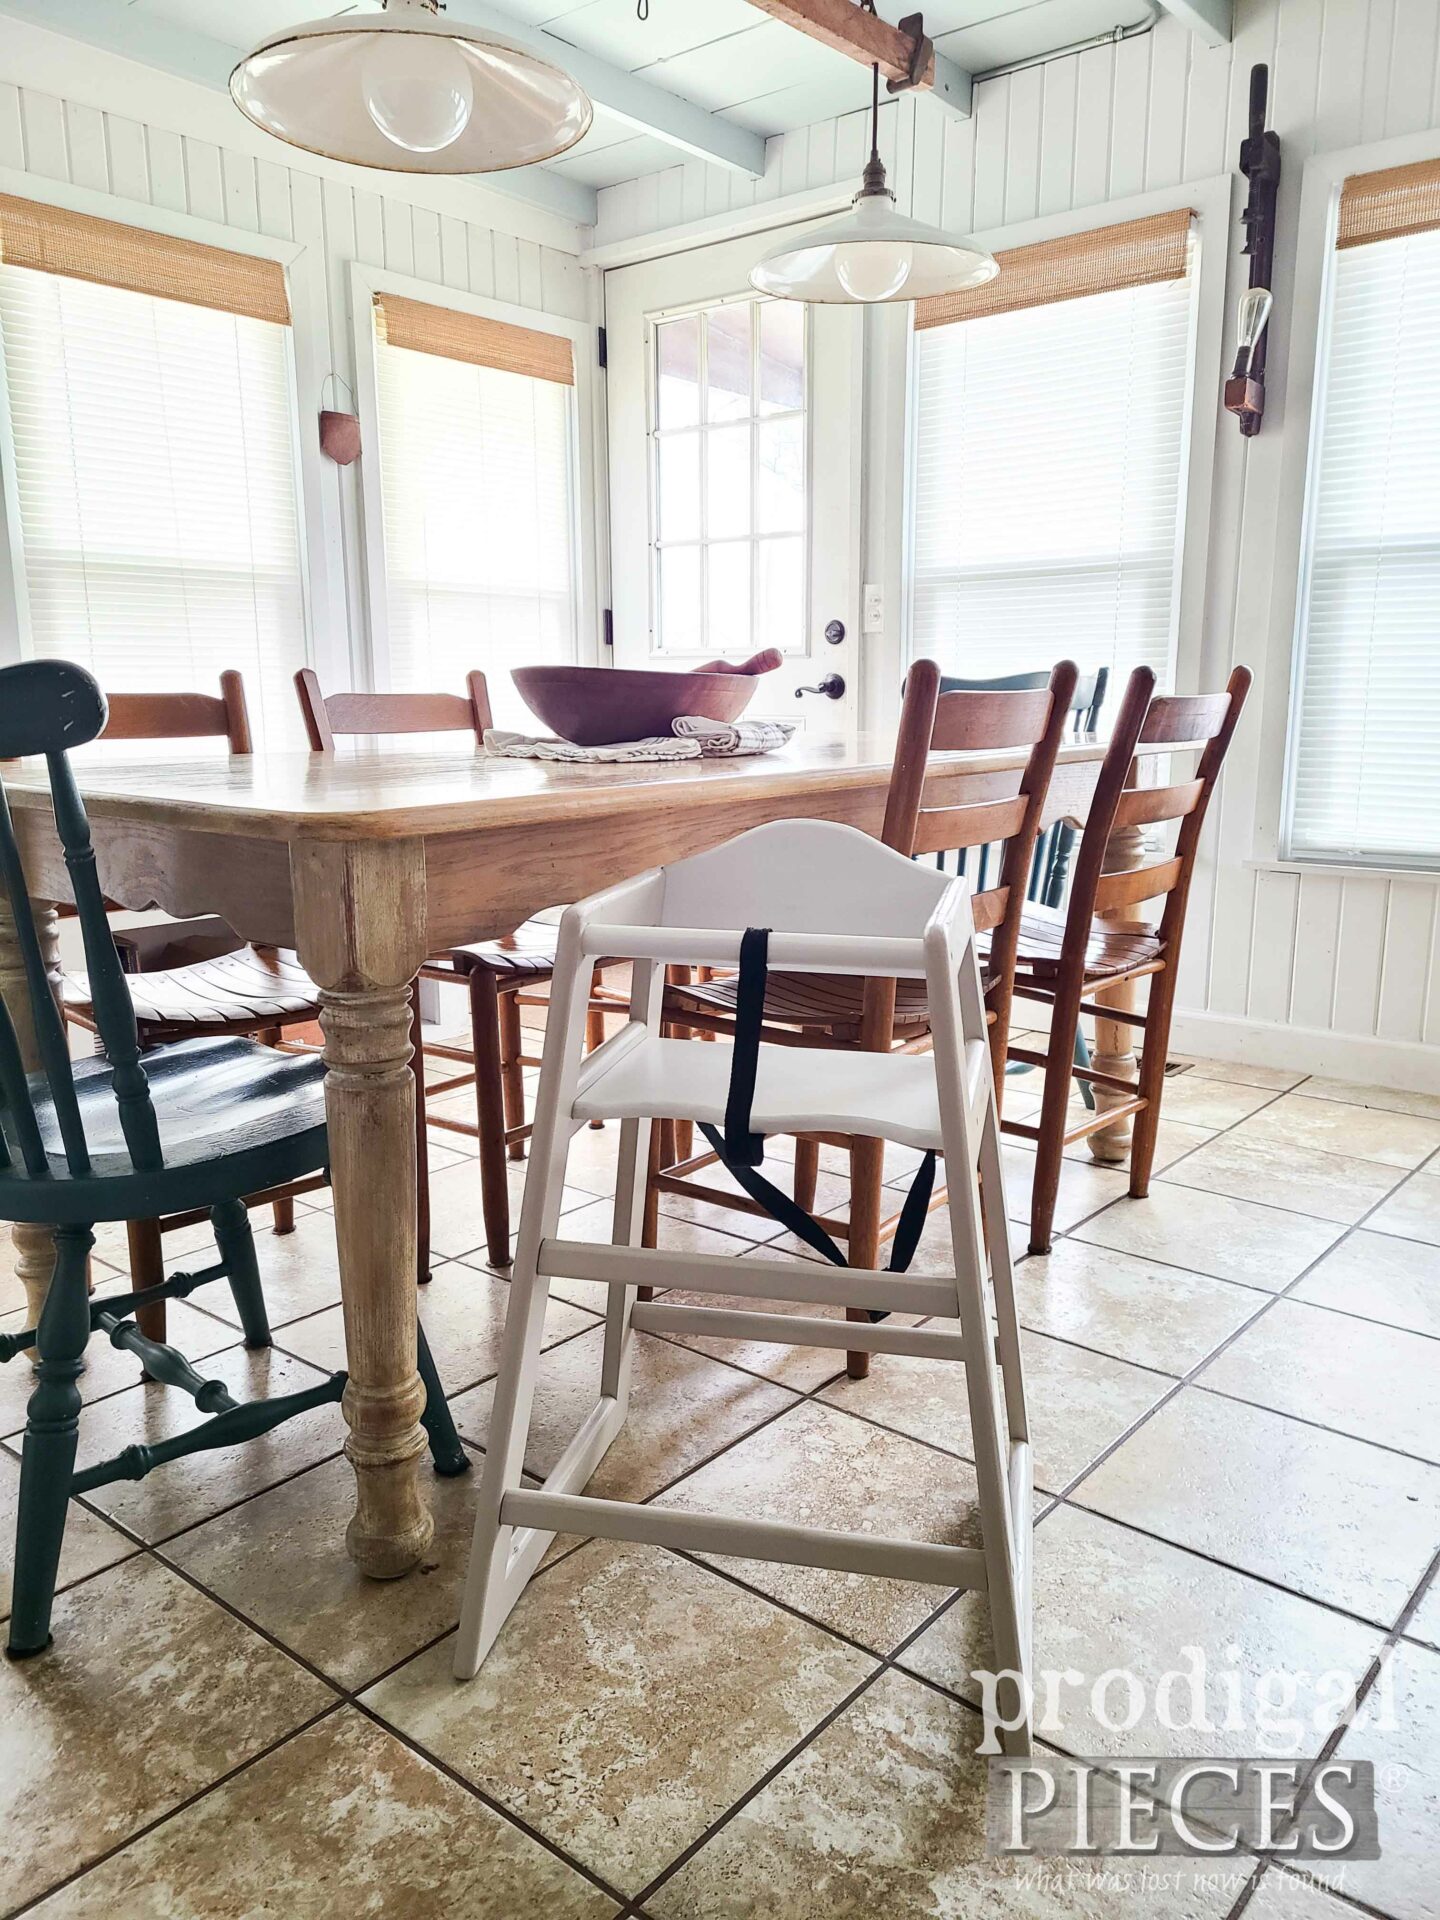 Modern Farmhouse DIY Painted Highchair Makeover by Larissa of Prodigal Pieces | prodigalpieces.com #prodigalpieces #dining #diy #farmhouse